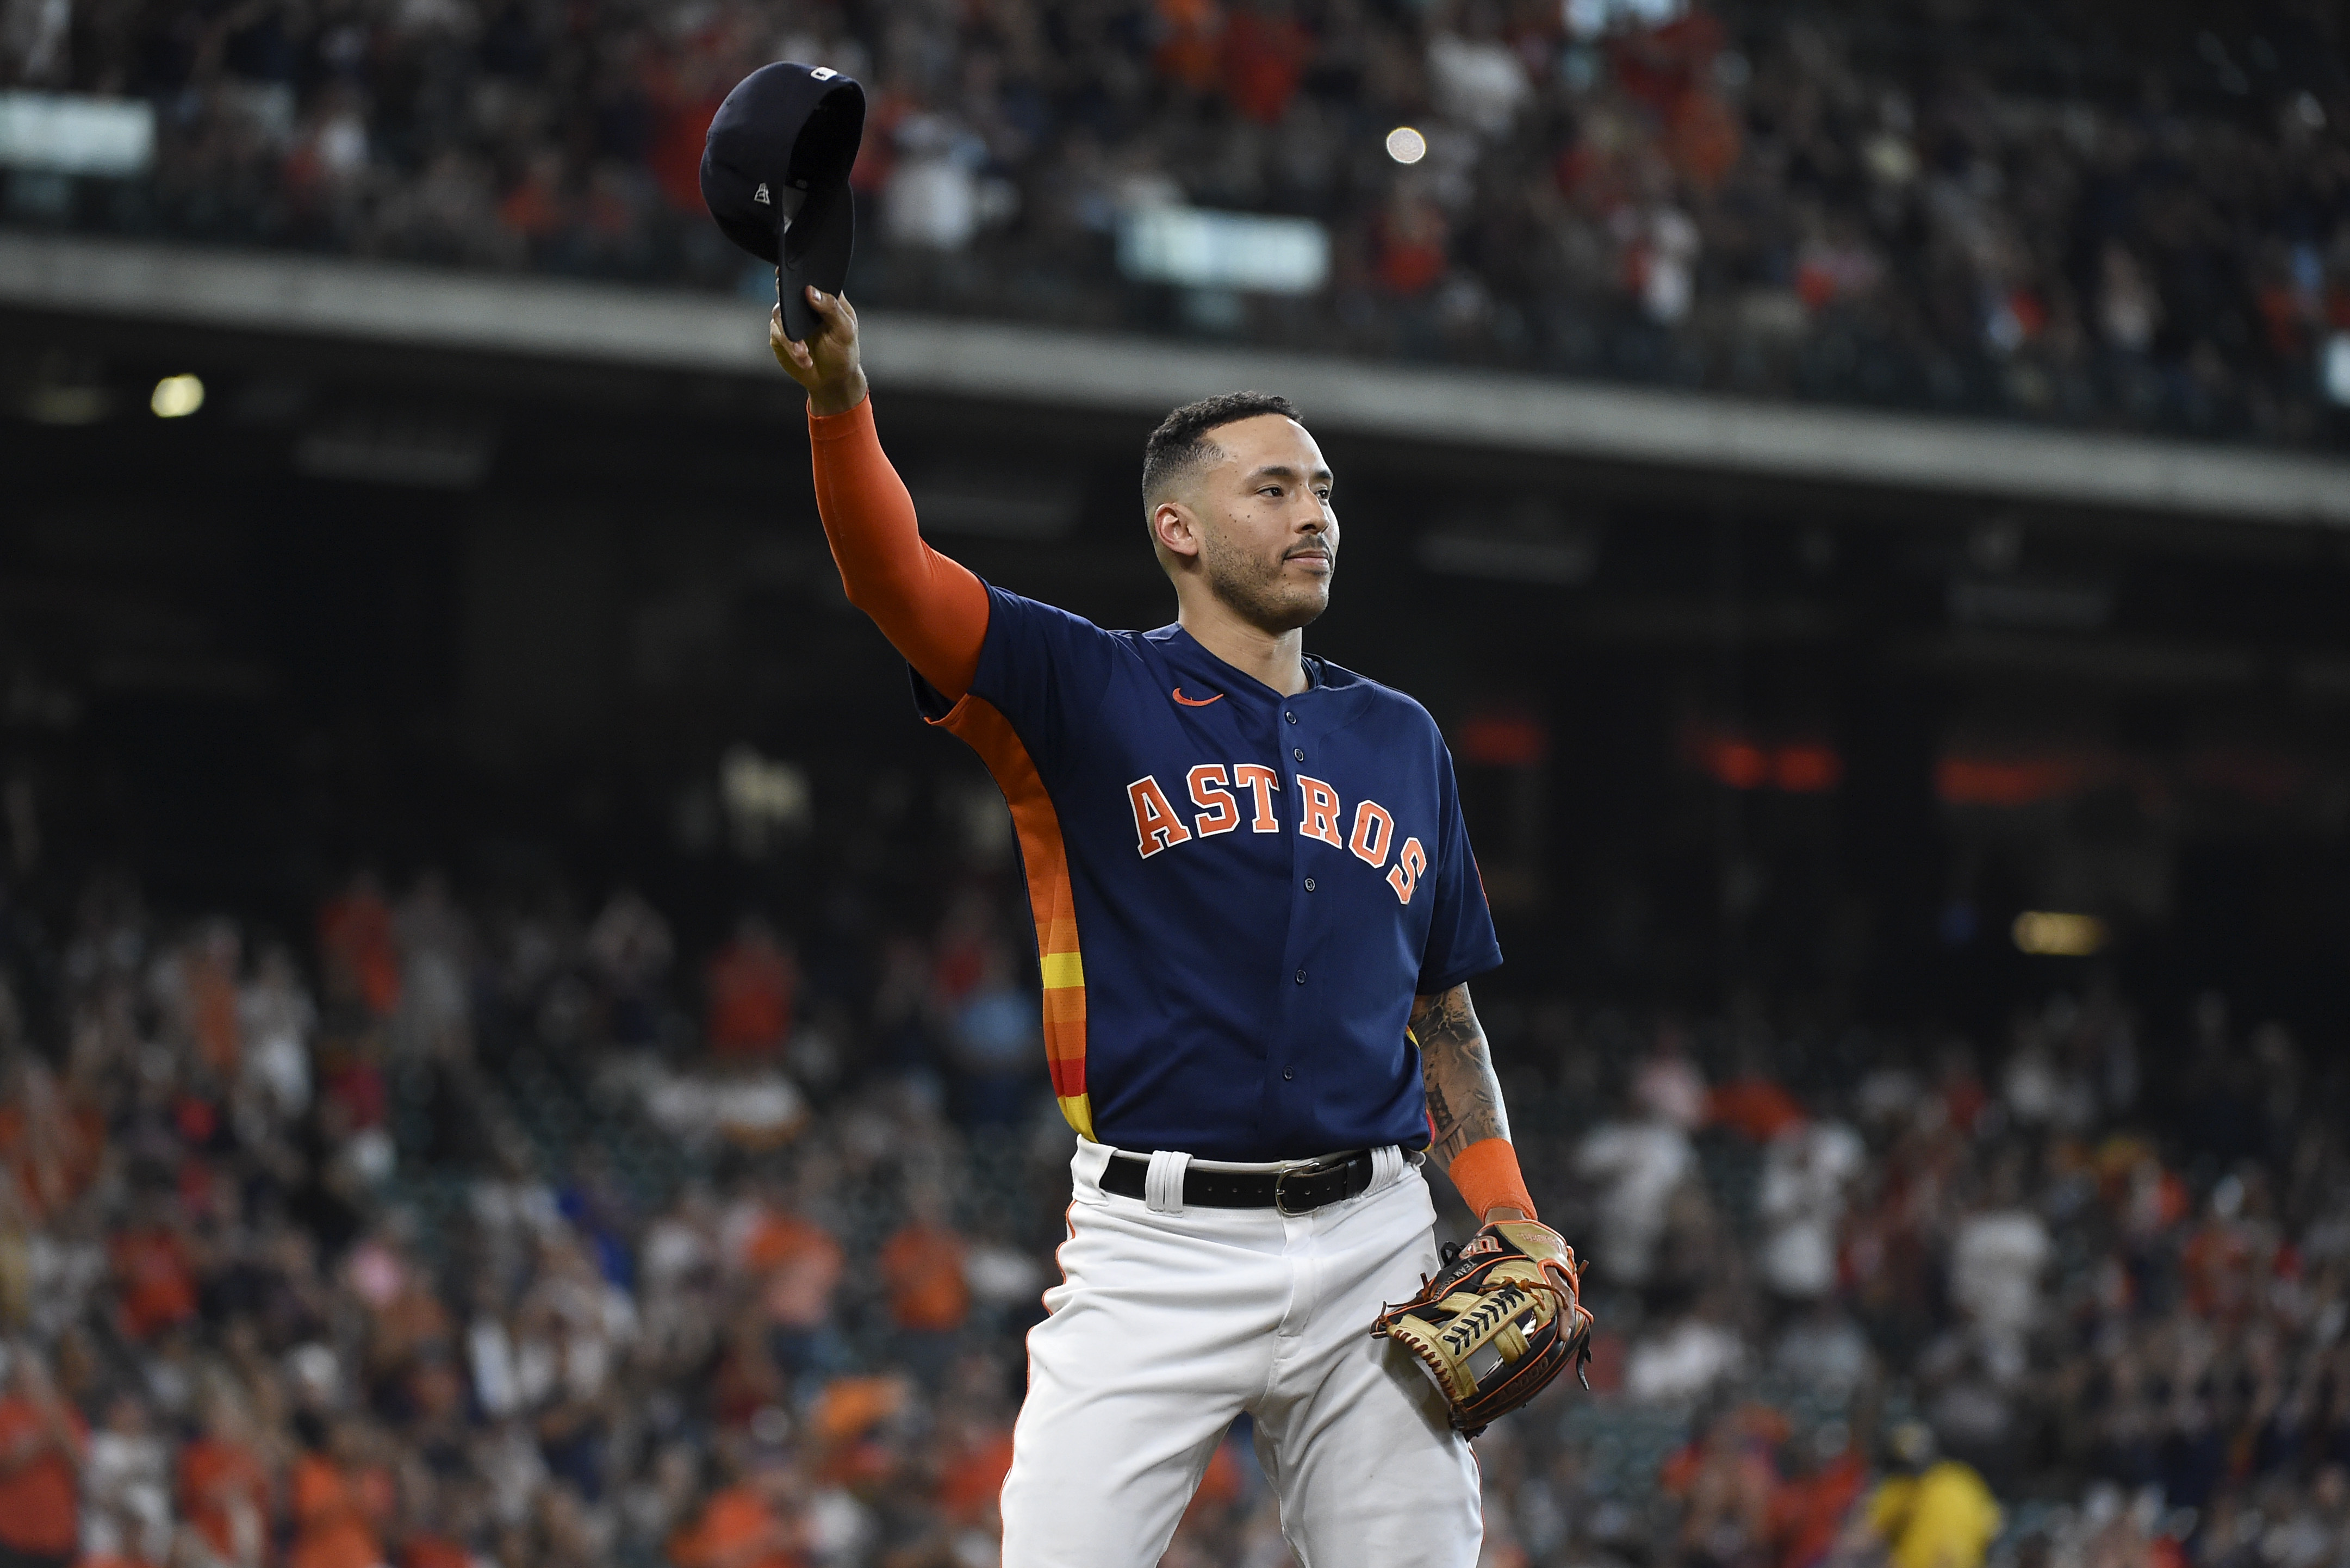 Astros optimistic after Game 1 loss in 2021 World Series